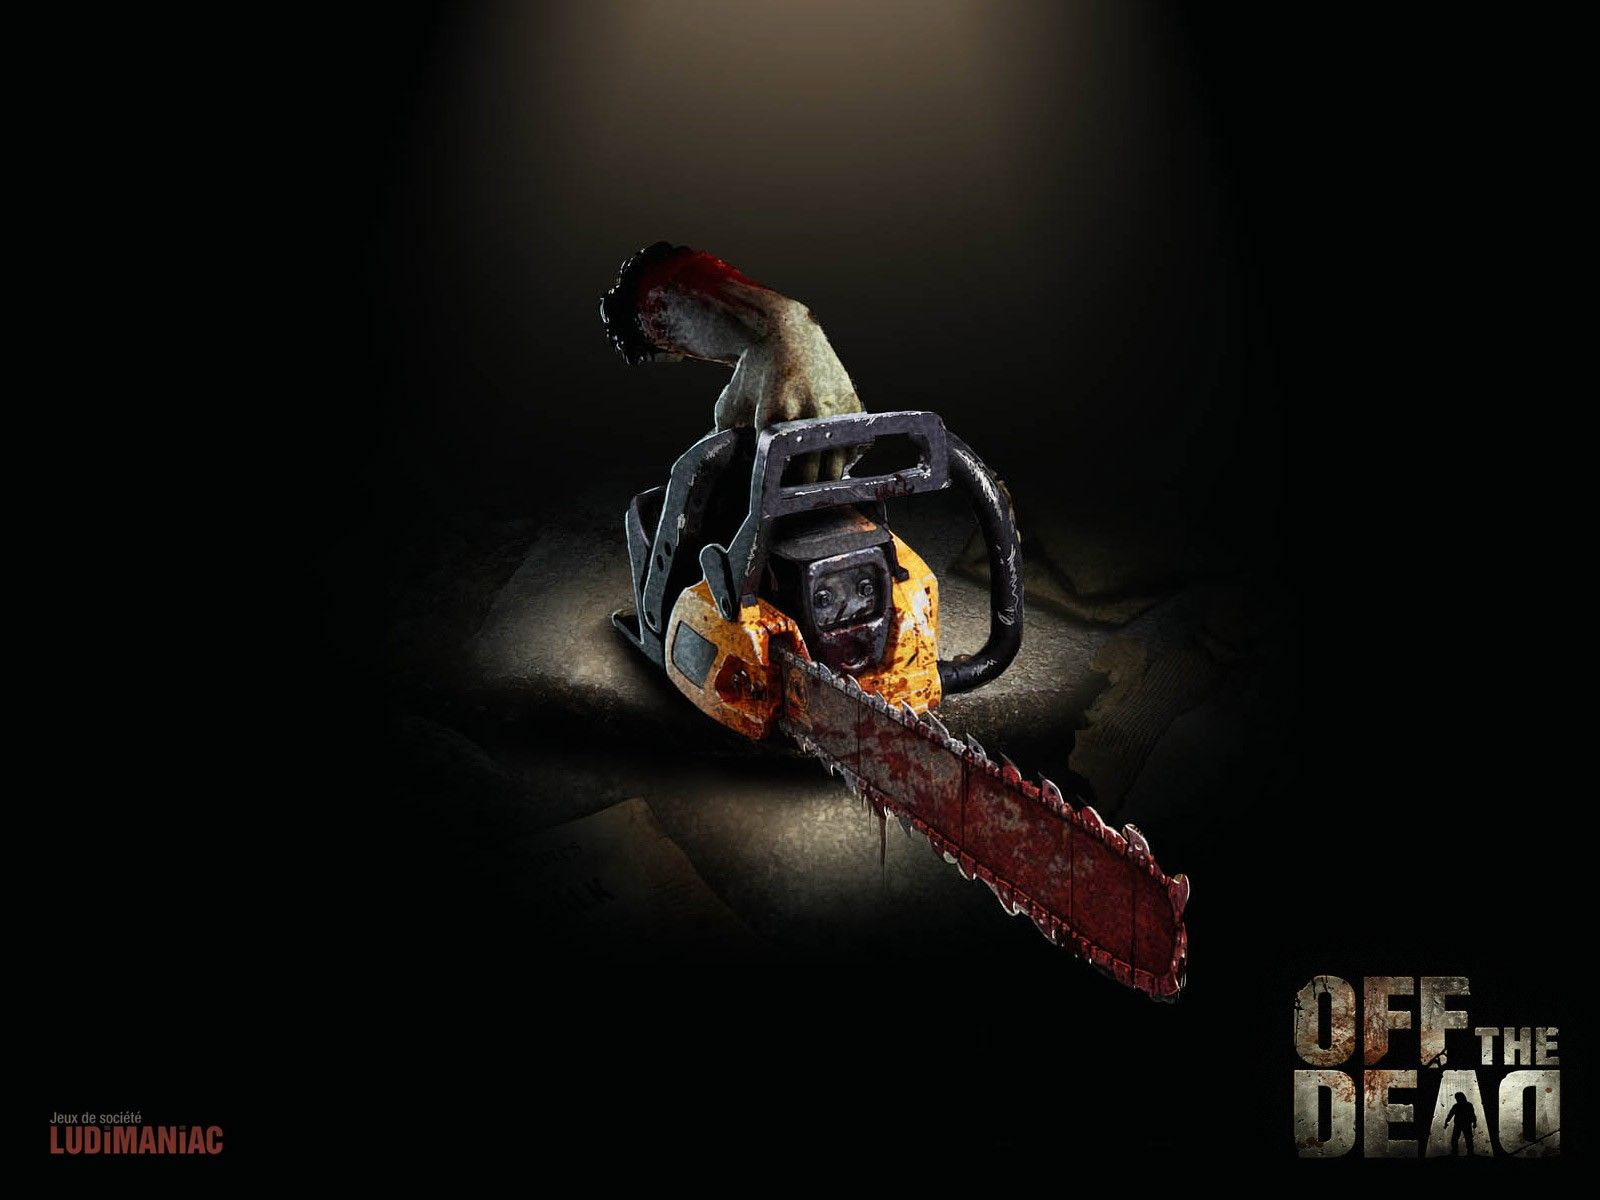 Chainsaw Wallpaper. Lollipop Chainsaw Wallpaper, Resident Evil 4 Chainsaw Wallpaper and Cosplay Lollipop Chainsaw Wallpaper